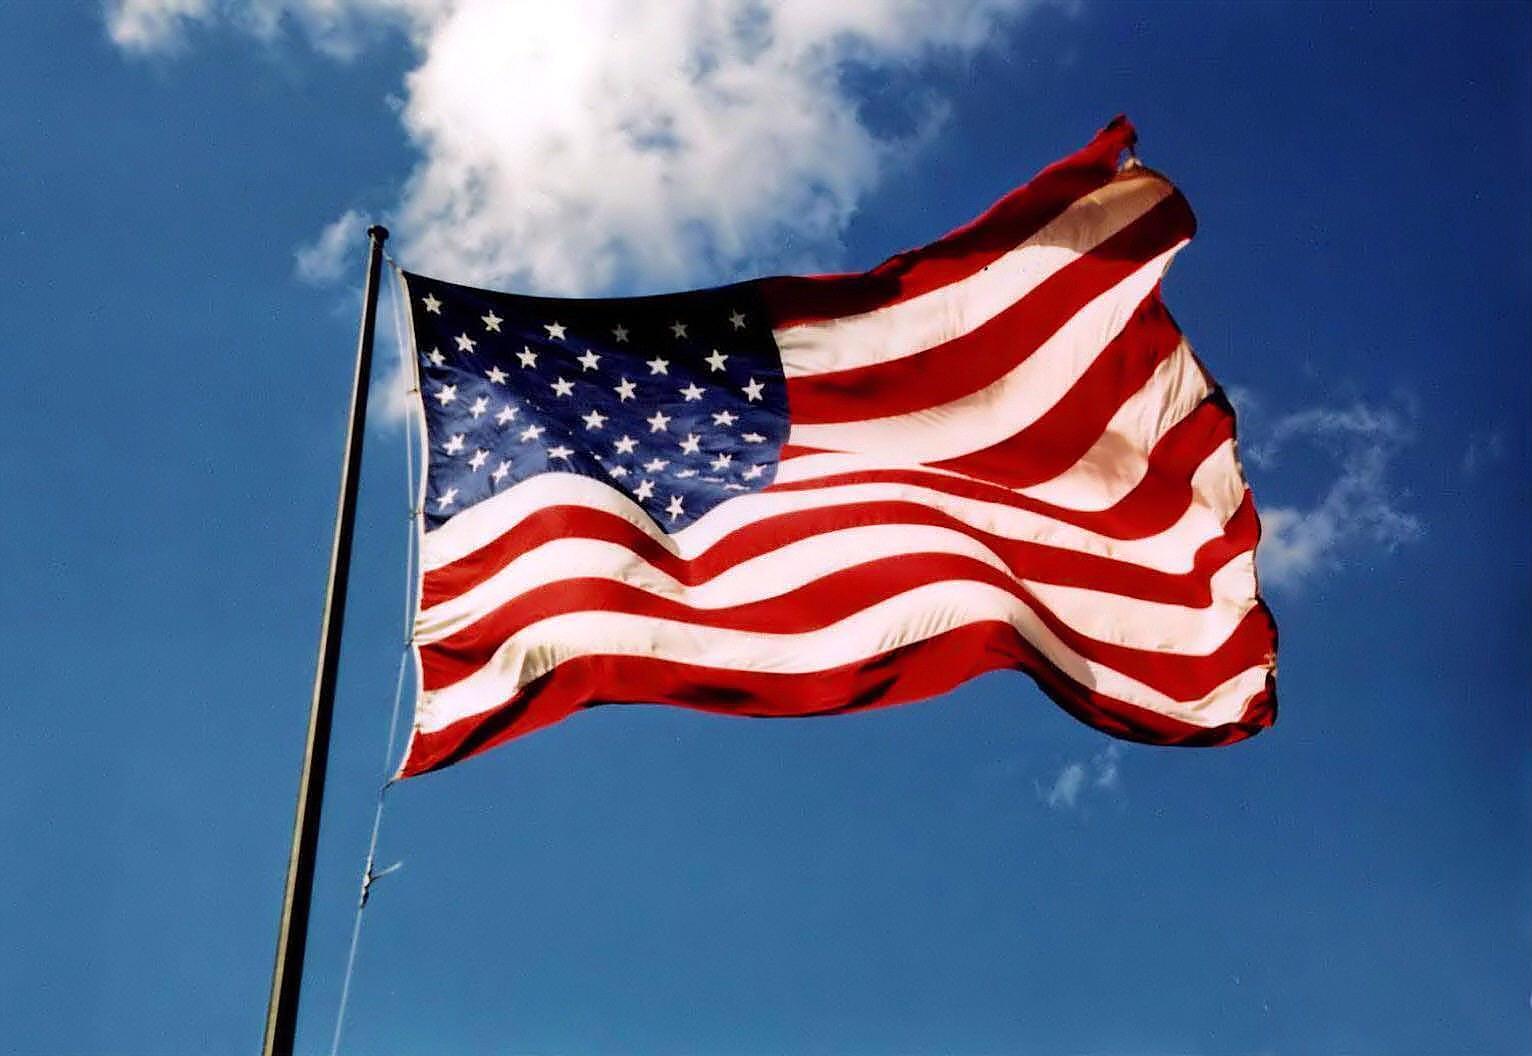 free-e-book-on-how-to-properly-display-the-american-flag-event